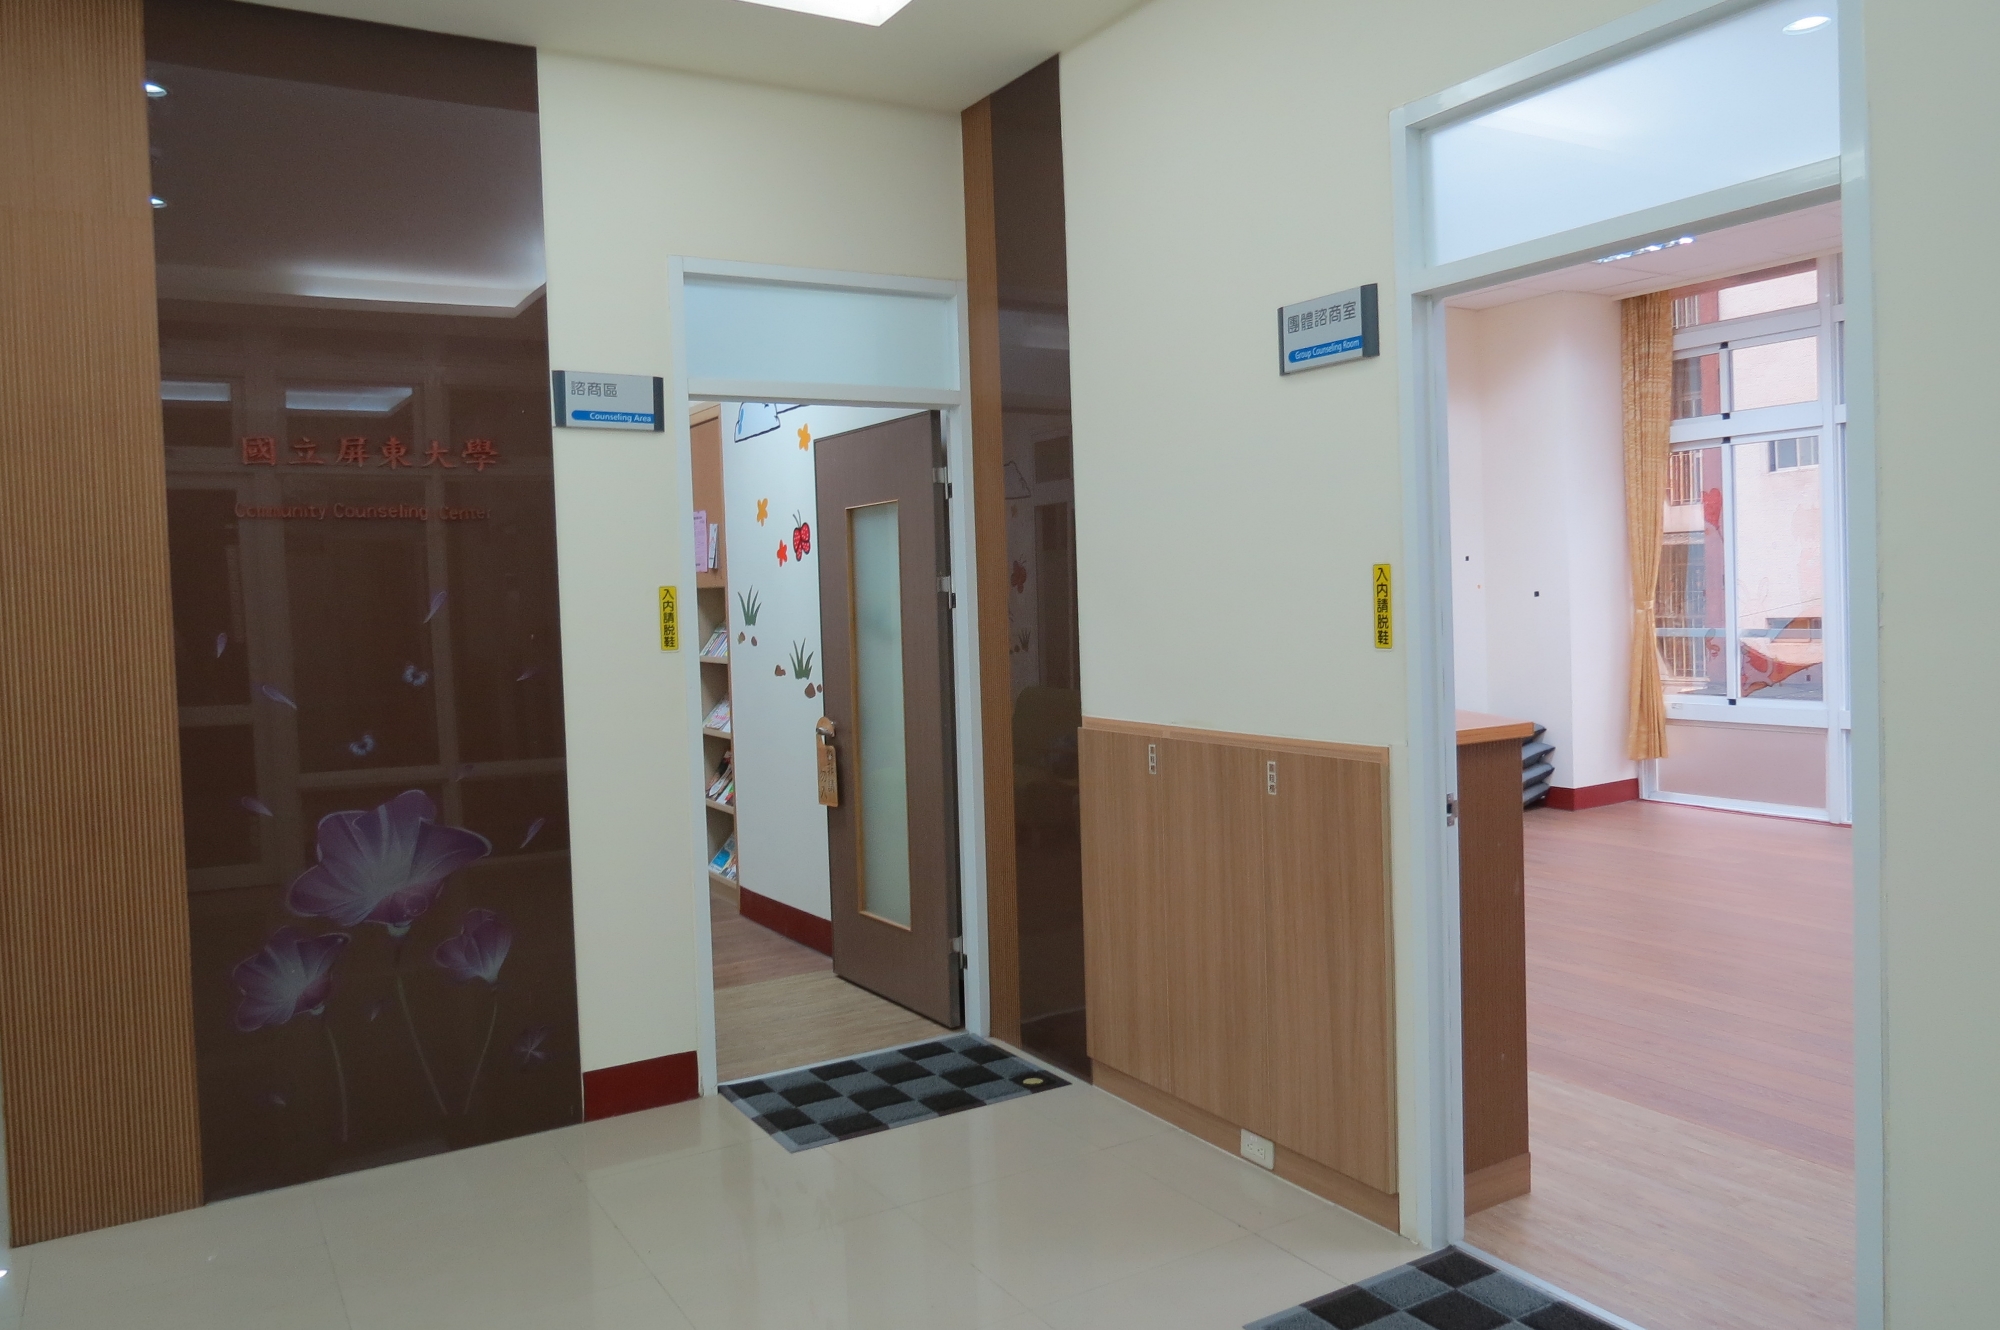 Entrance of Counseling Room